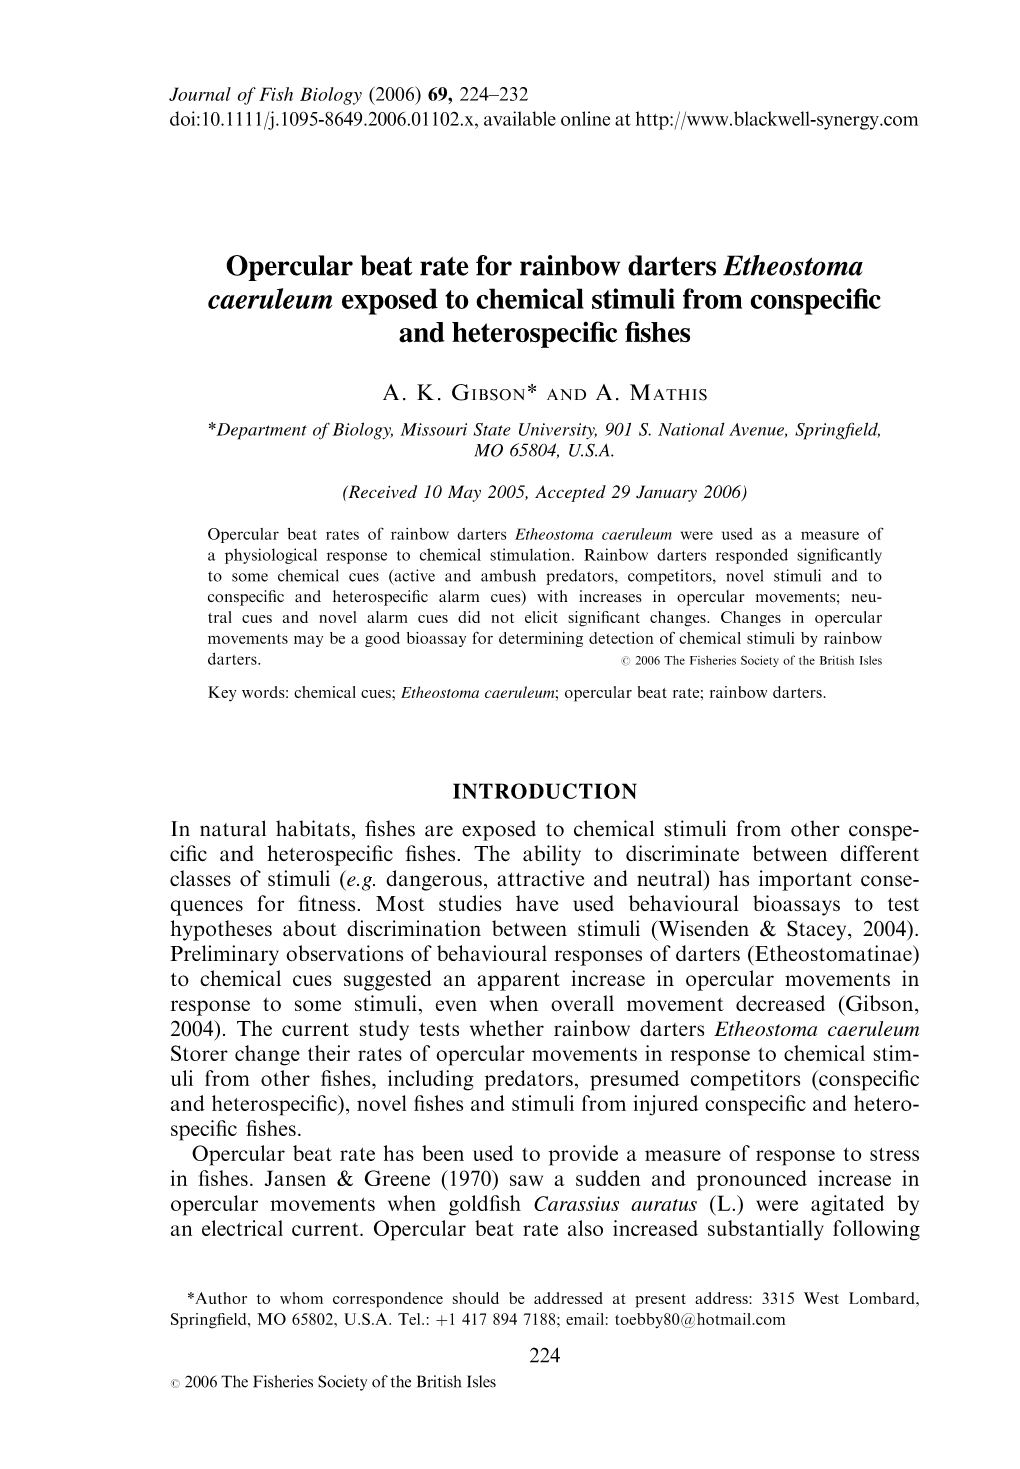 Opercular Beat Rate for Rainbow Darters Etheostoma Caeruleum Exposed to Chemical Stimuli from Conspeciﬁc and Heterospeciﬁc ﬁshes